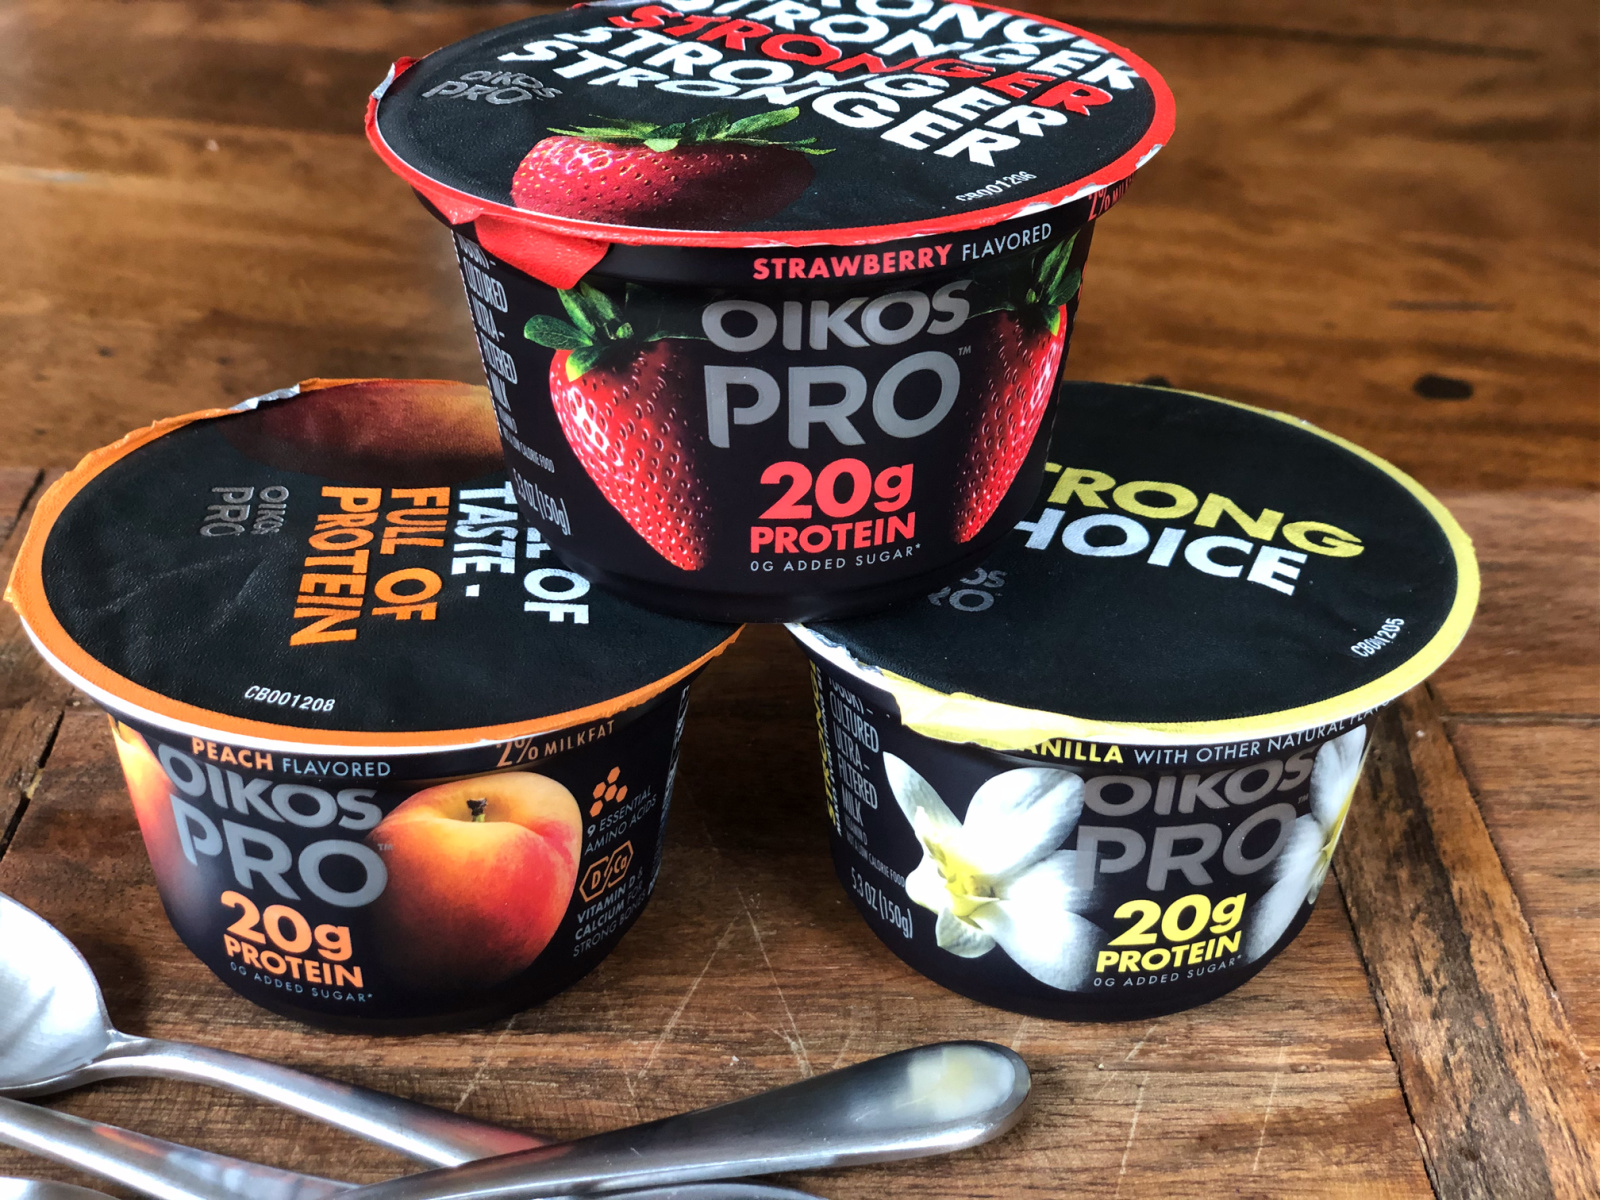 Don’t Miss Out On A FREE Cup Of Dannon Oikos Pro